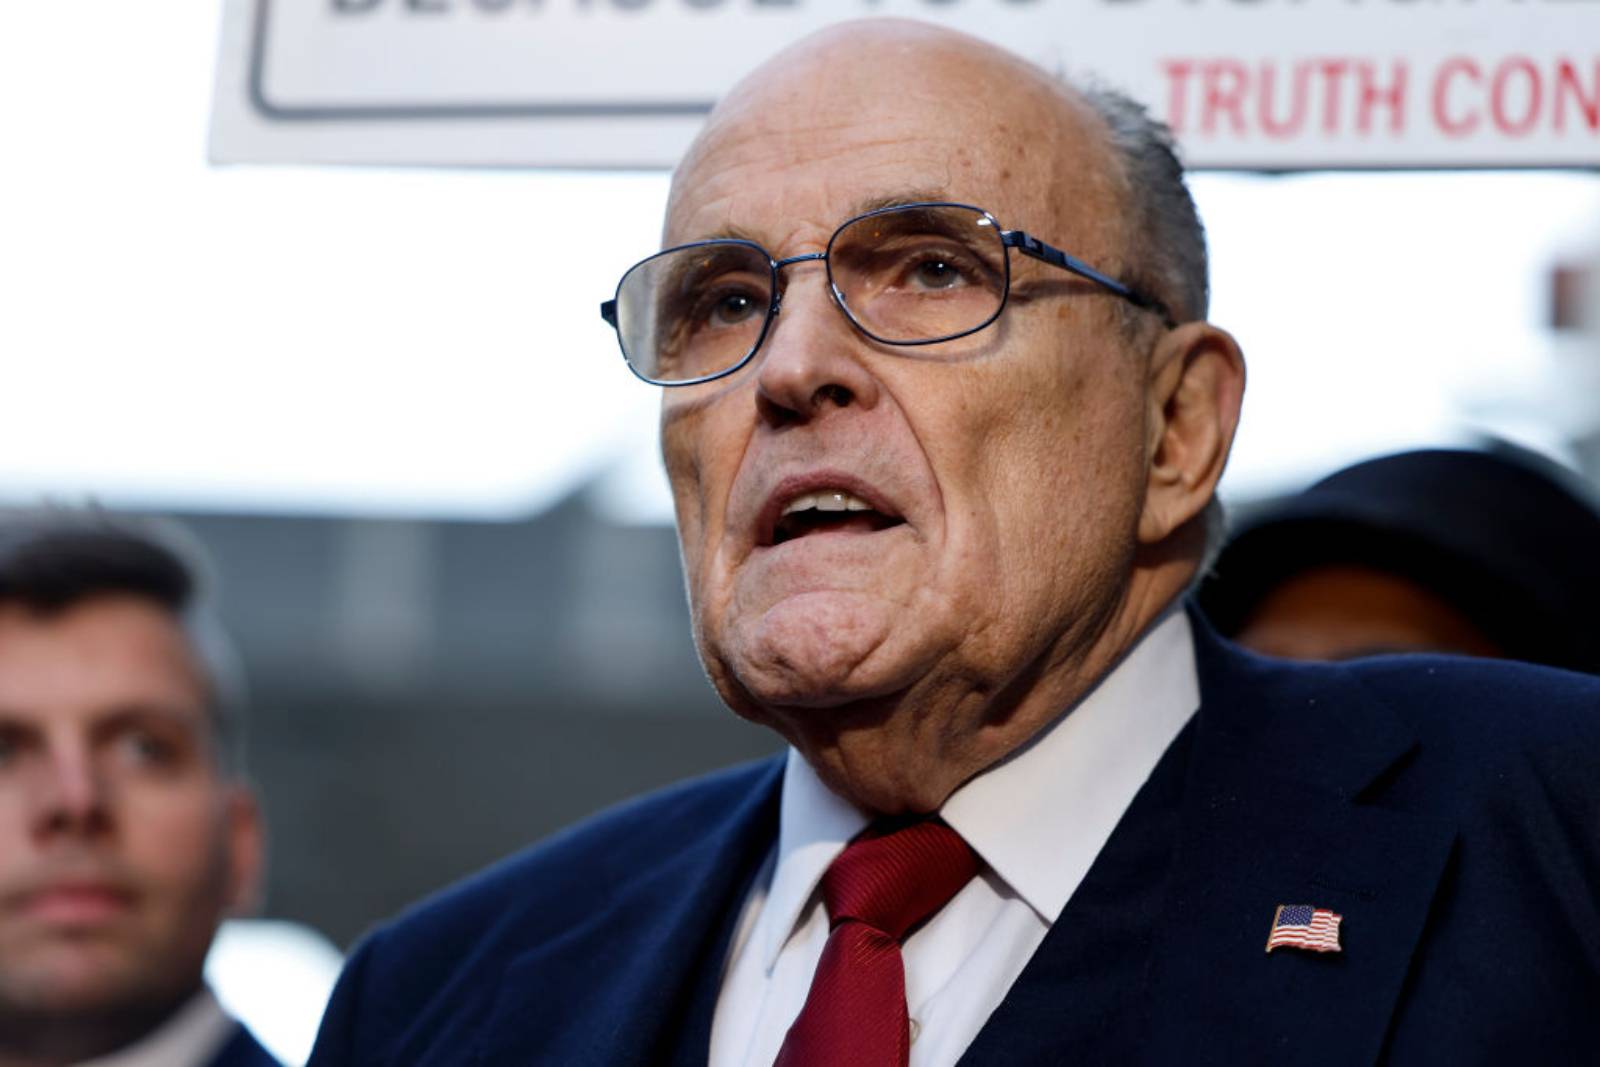 Rudy Giuliani, the former personal lawyer for former U.S. President Donald Trump, speaks with reporters outside of the E. Barrett Prettyman U.S. District Courthouse after a verdict was reached in his defamation jury trial on December 15, 2023 in Washington, DC. A jury has ordered Giuliani to pay $148 million in damages to Fulton County election workers Ruby Freeman and Shaye Moss. (Photo by Anna Moneymaker/Getty Images)